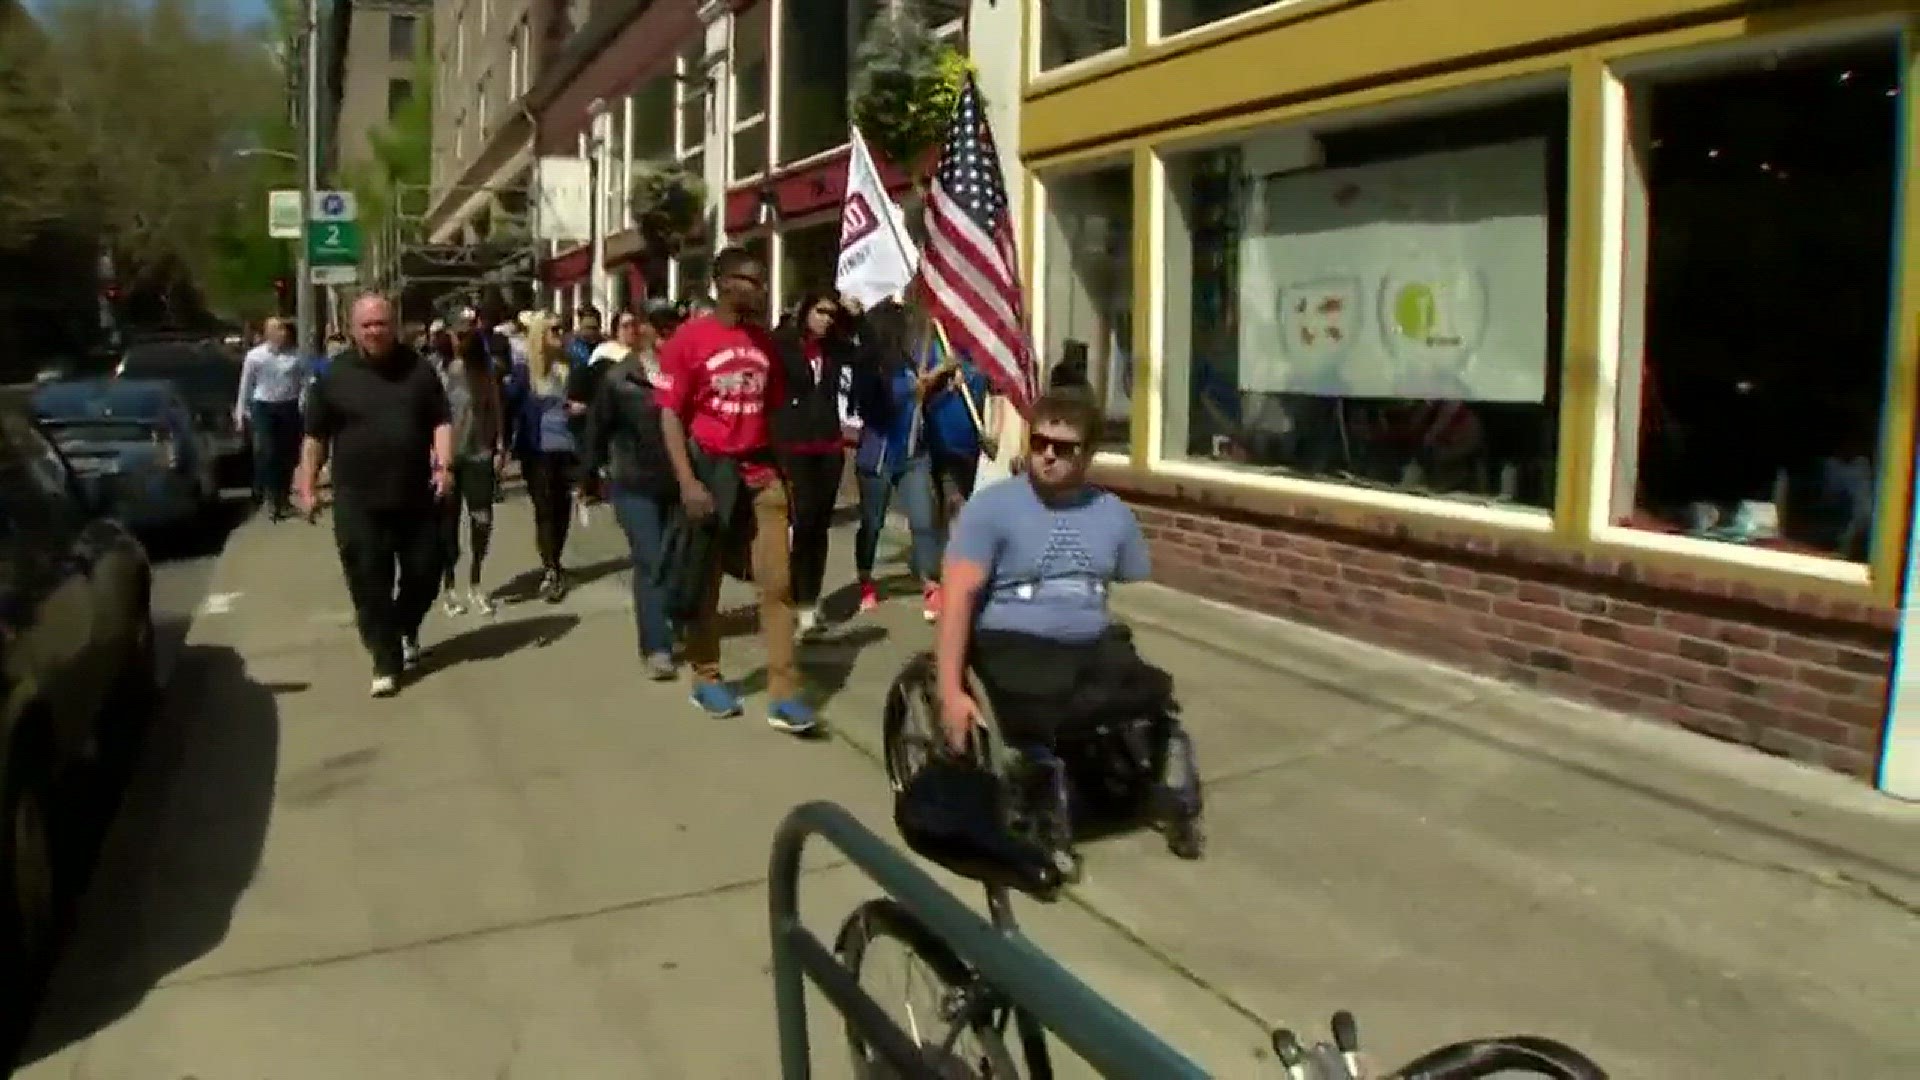 The Carry the Load march to support veterans and their families after the loss of loved ones began in Seattle on Friday and will come through San Antonio on May 24.